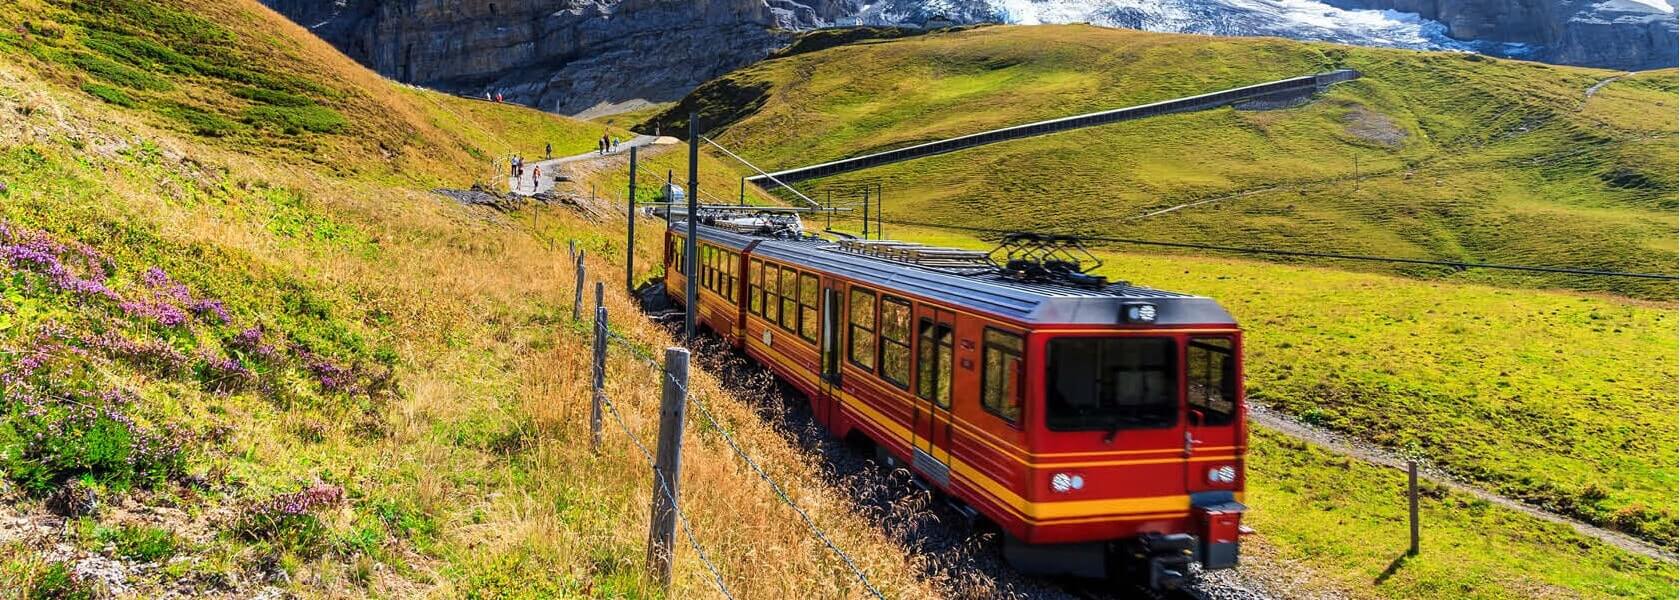 Wengen and the Jungfrau Express